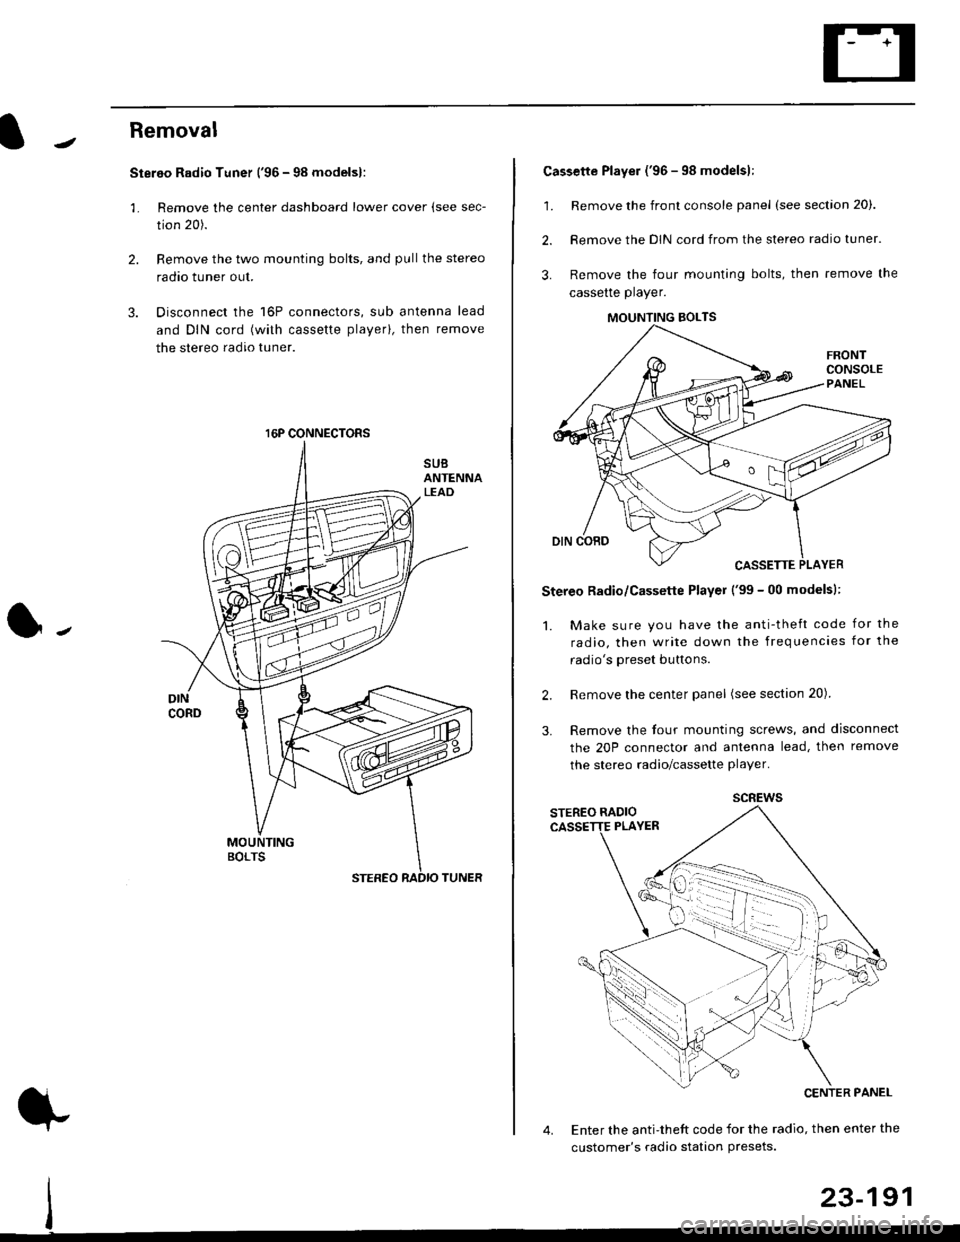 HONDA CIVIC 1997 6.G Workshop Manual Removal
Stereo Radio Tuner (96 - 98 modelsl:
3.
1.
2.
Remove the center dashboard lower cover (see sec-
tion 20).
Remove the two mounting bolts, and pullthe stereo
radao tuner out.
Disconnect the 16P